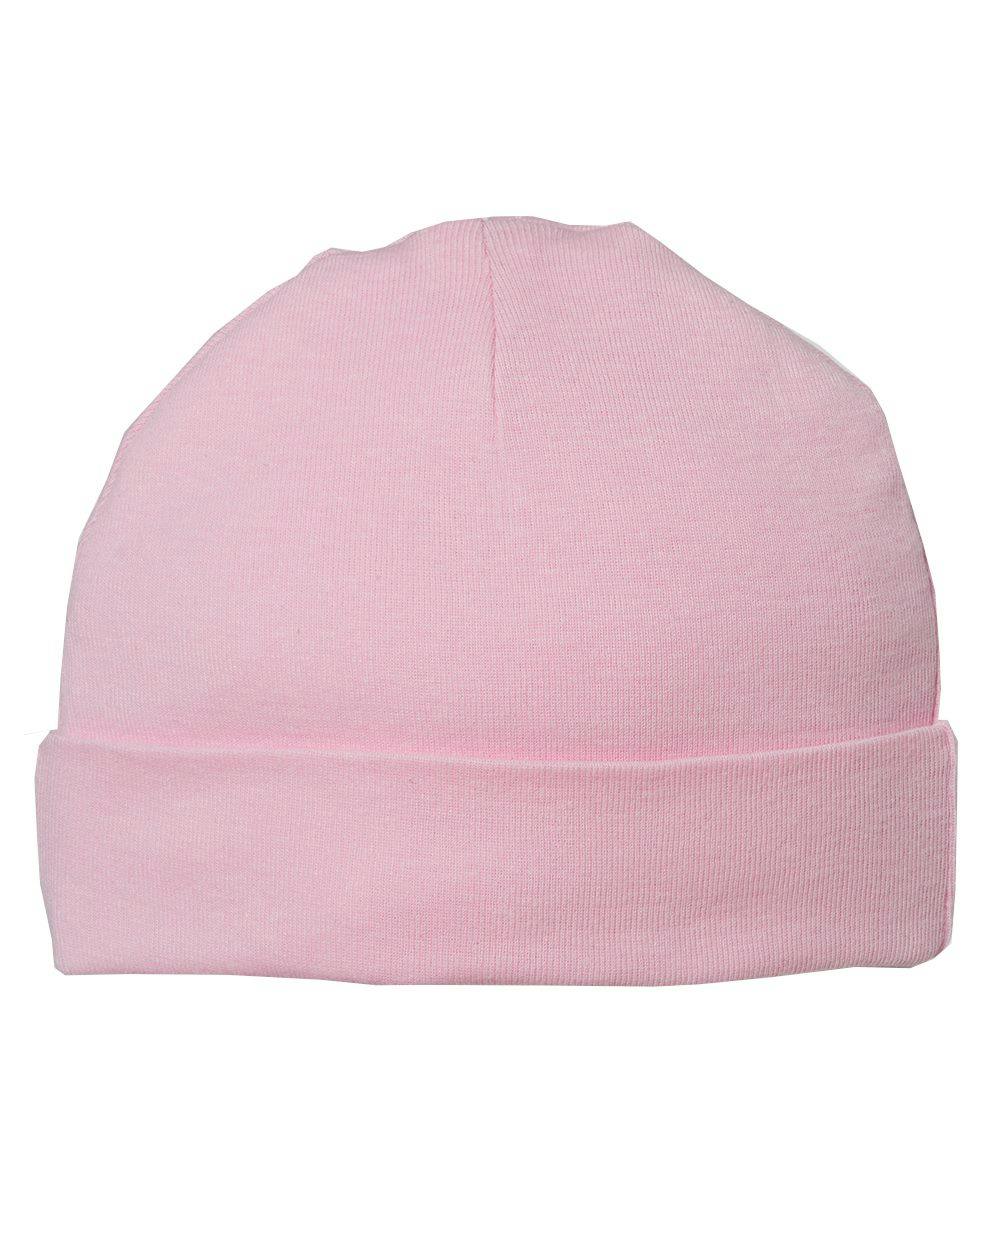 Image for Infant Baby Rib Cap - 4451